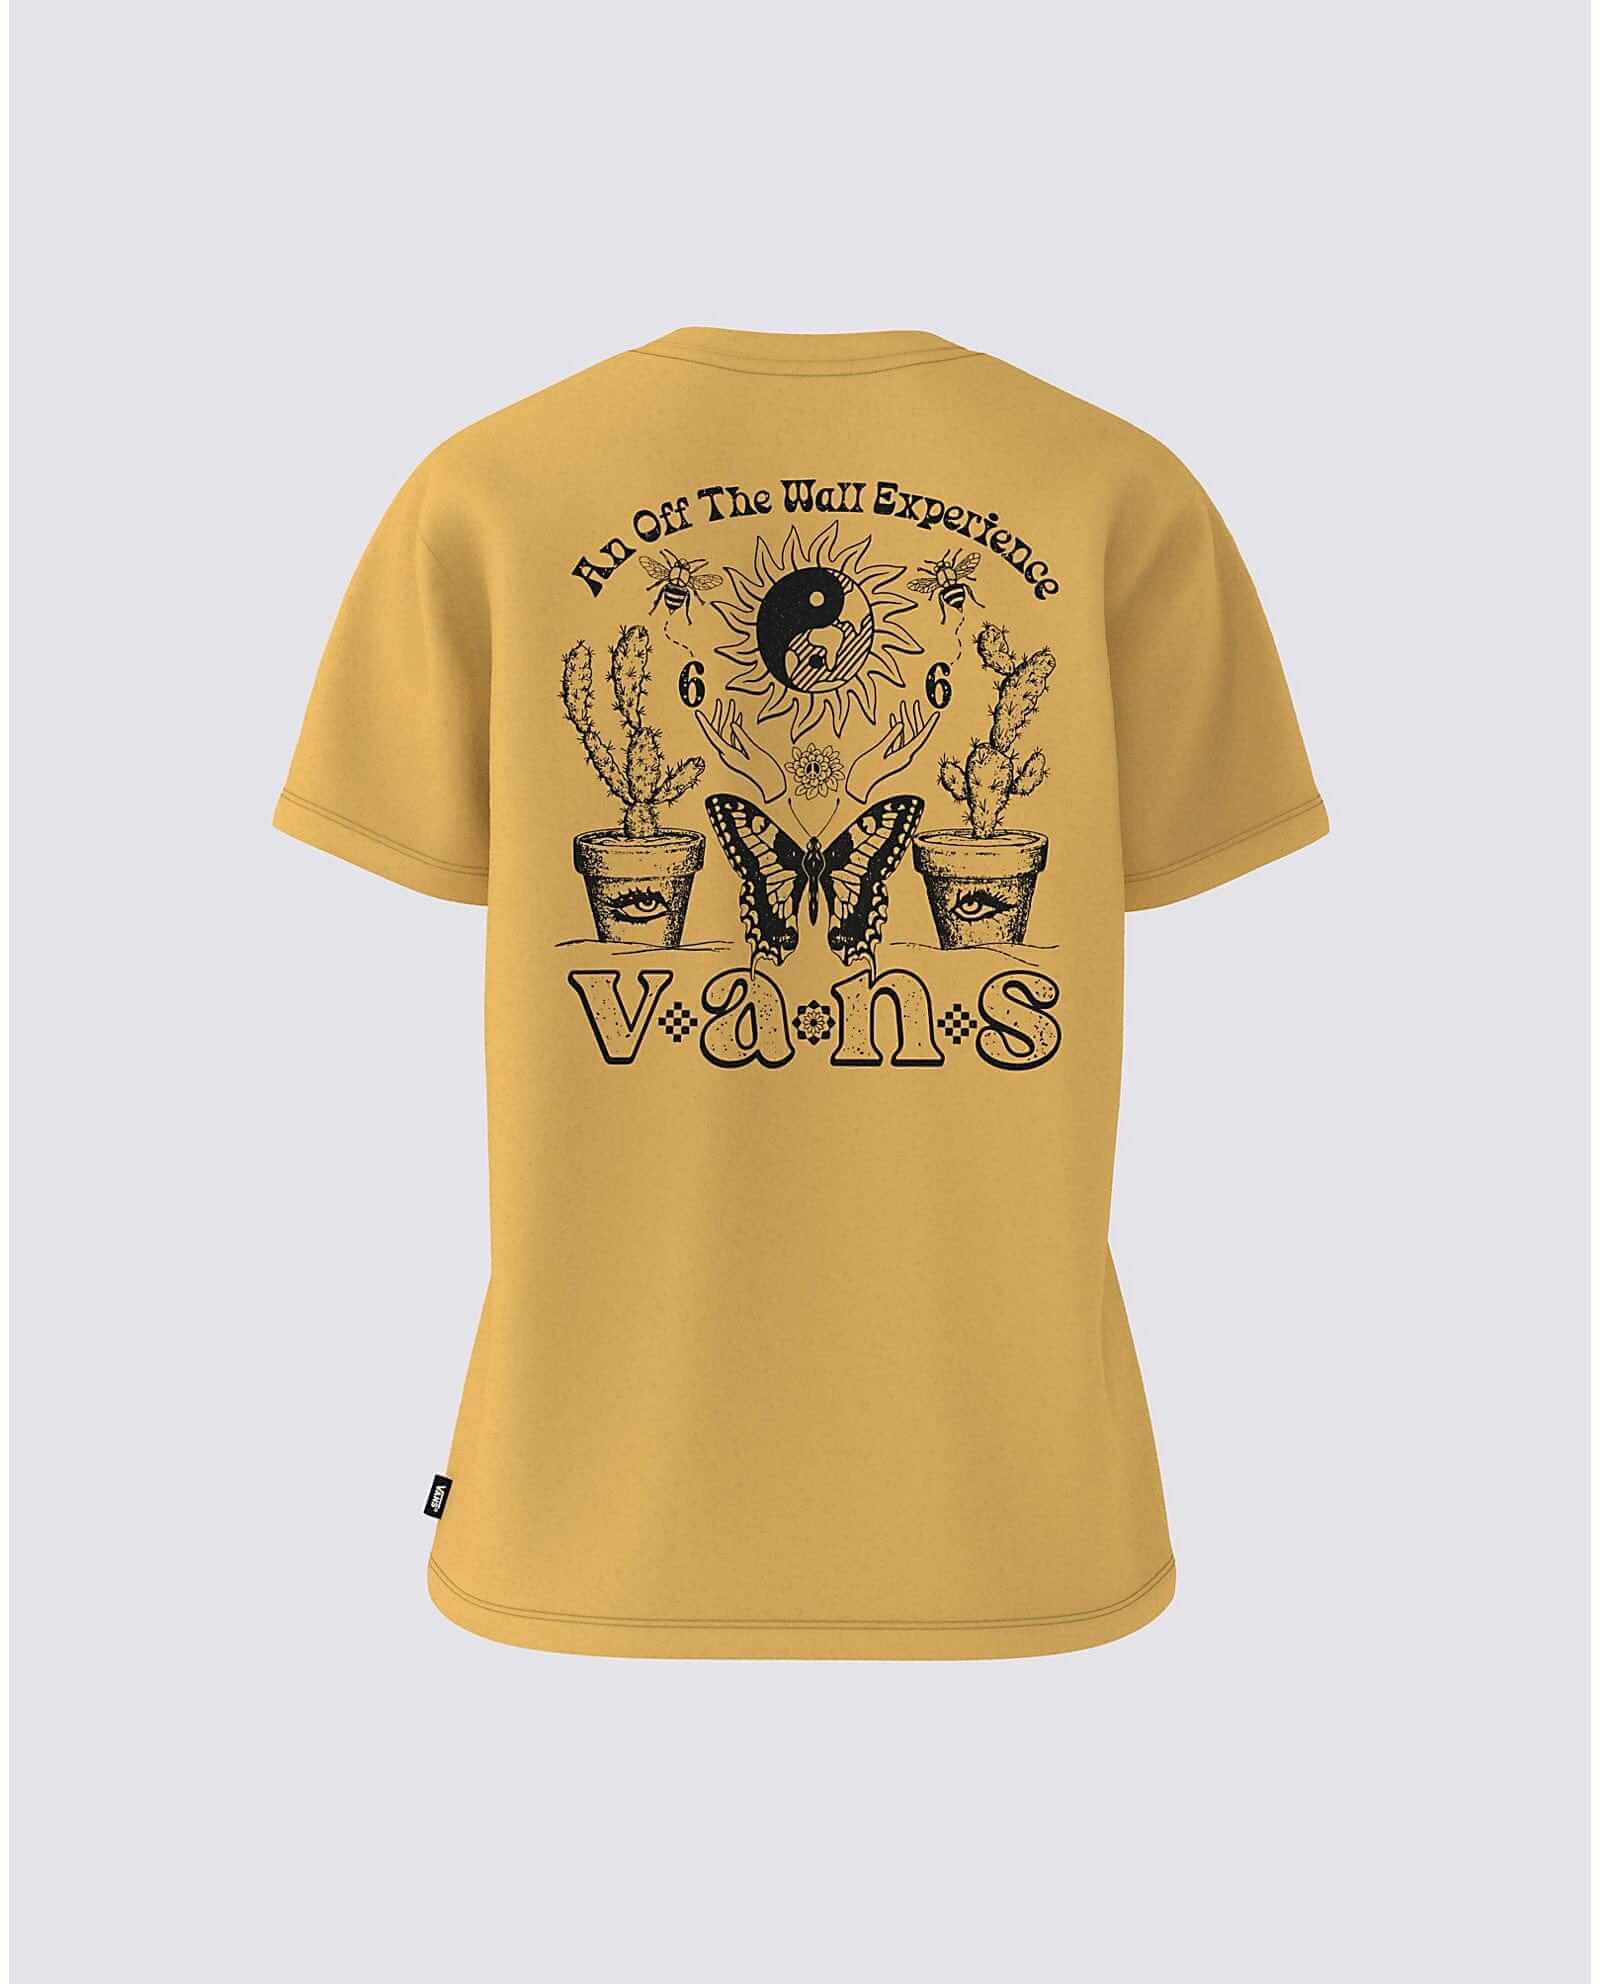 VANS Apparel & Accessories Small Vans Off the Wall, Other Worldly Experience T-shirt, Yellow